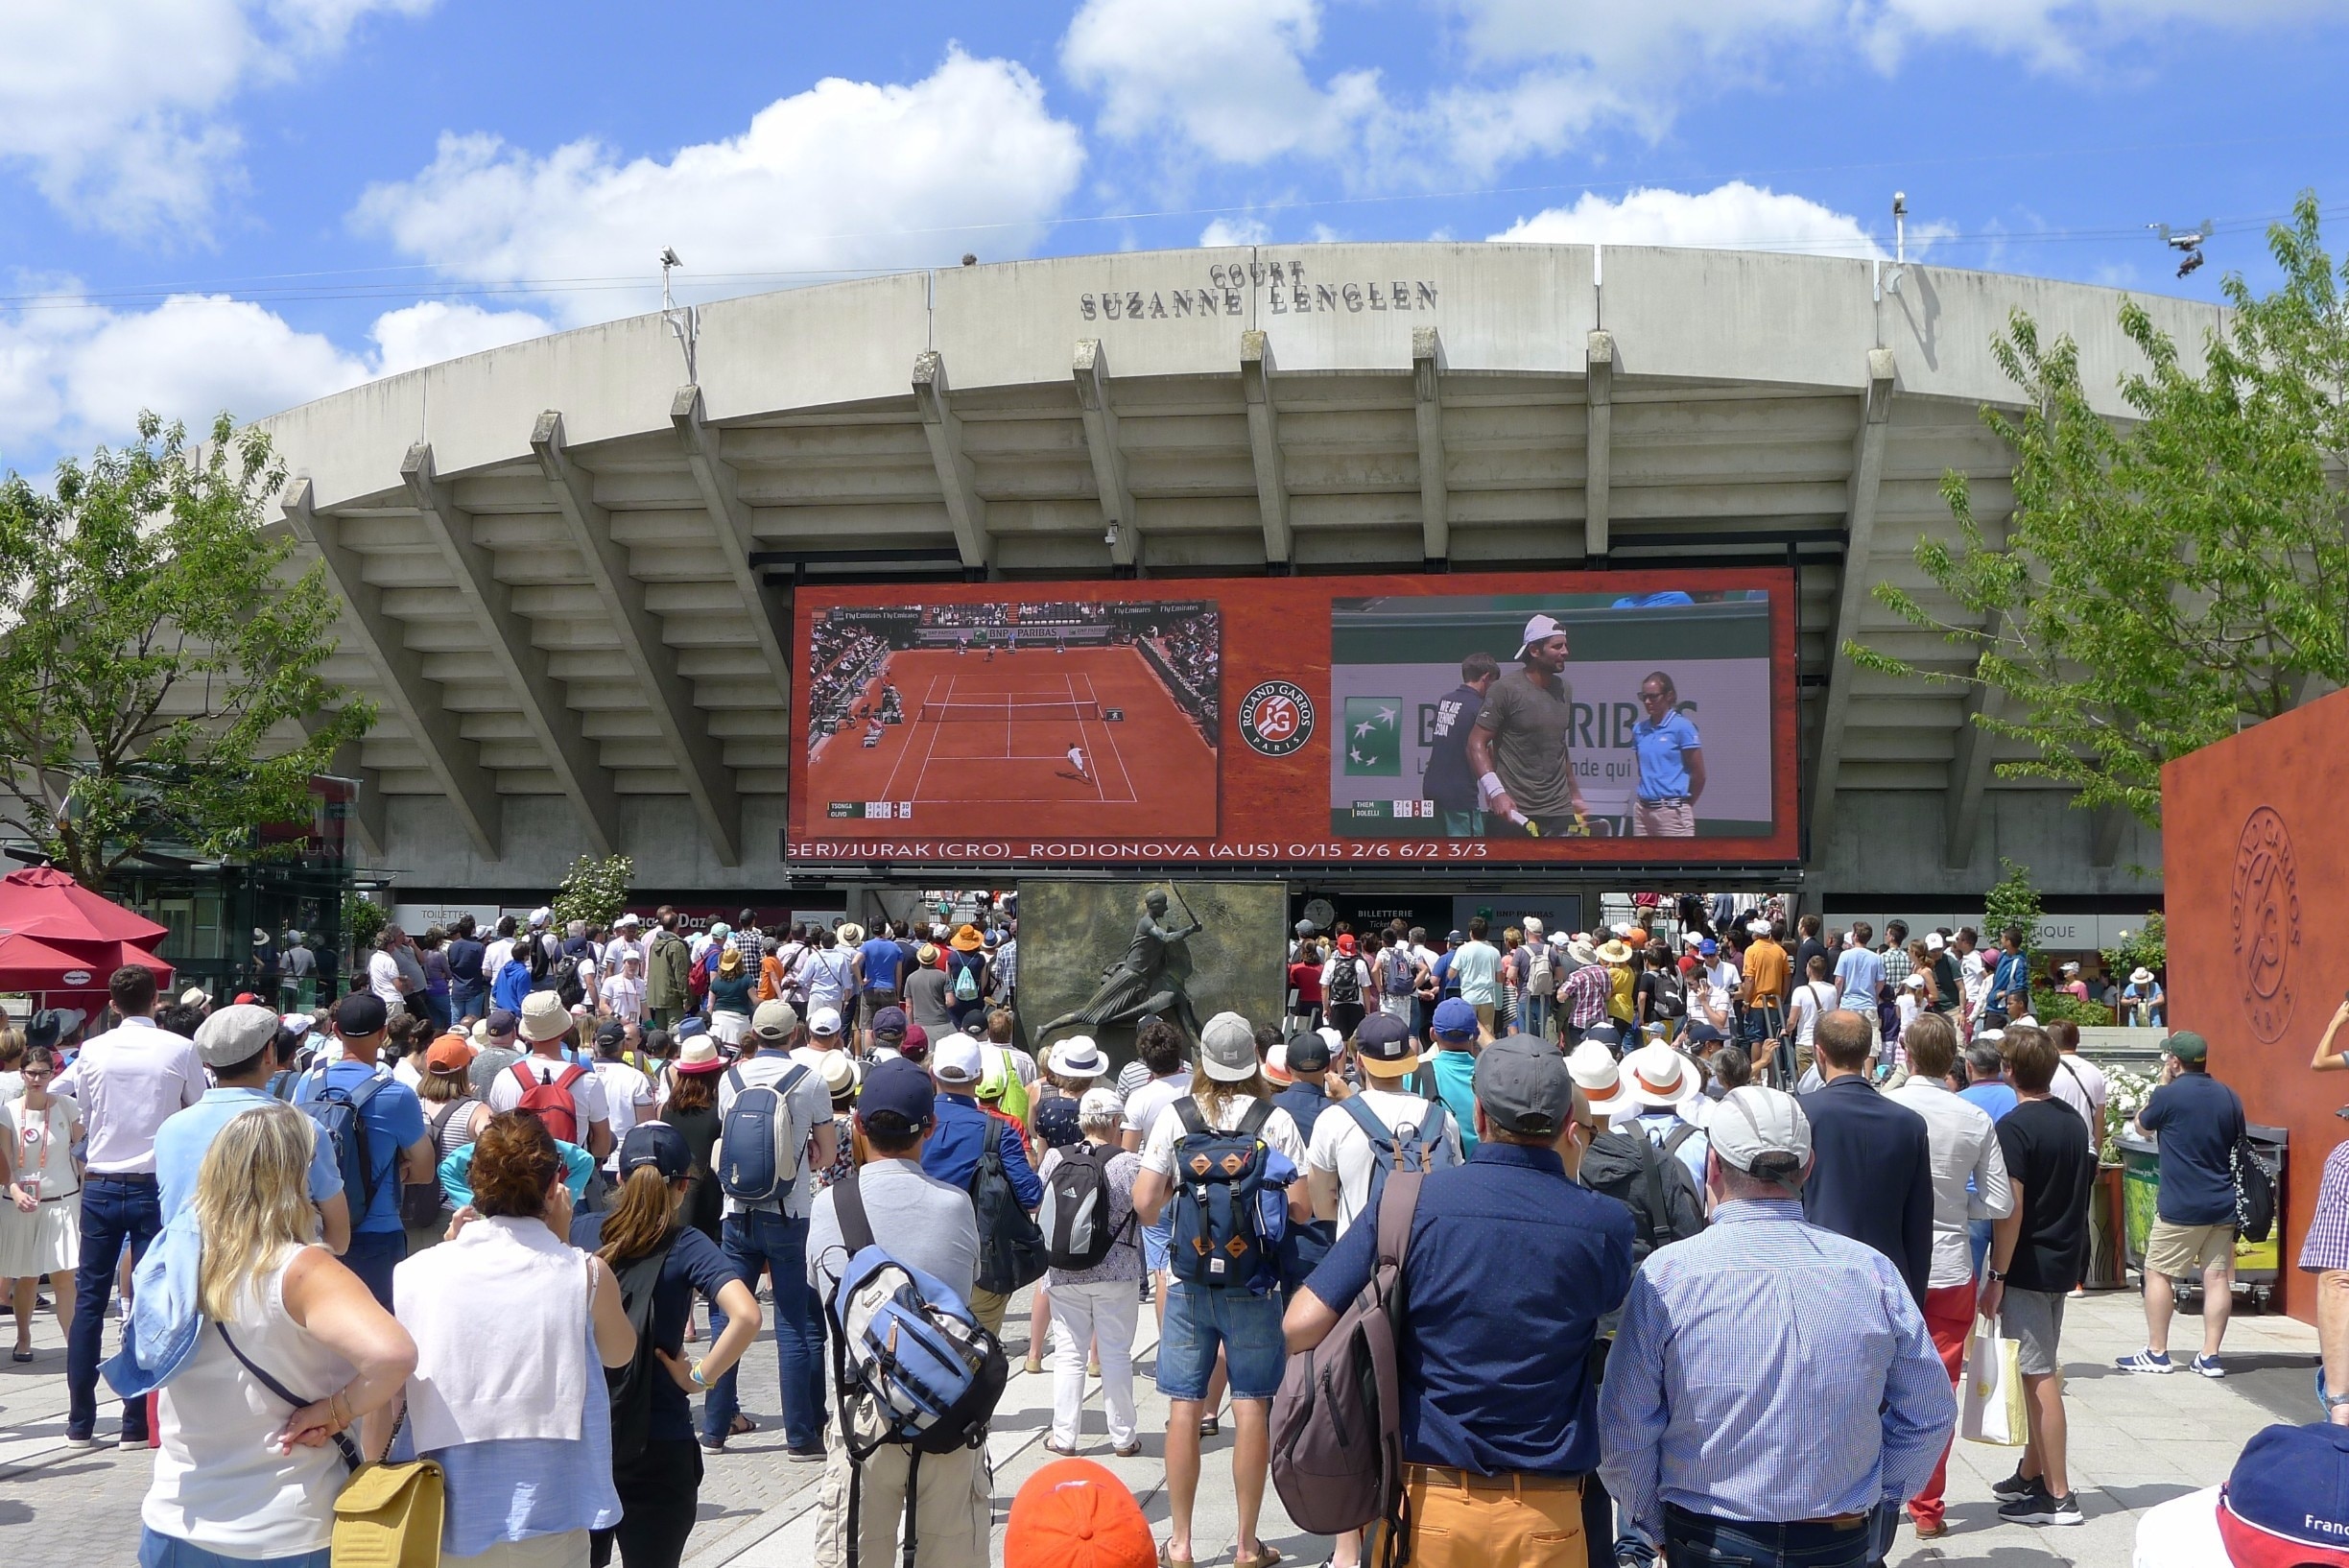 Sunny spring time in Paris and tennis at Roland Garros are the perfect combination for how to enjoy several days in Paris for the tennis enthusiast. Visit during the first week and enjoy many matches on the smaller outside courts to get very close to the players and action.